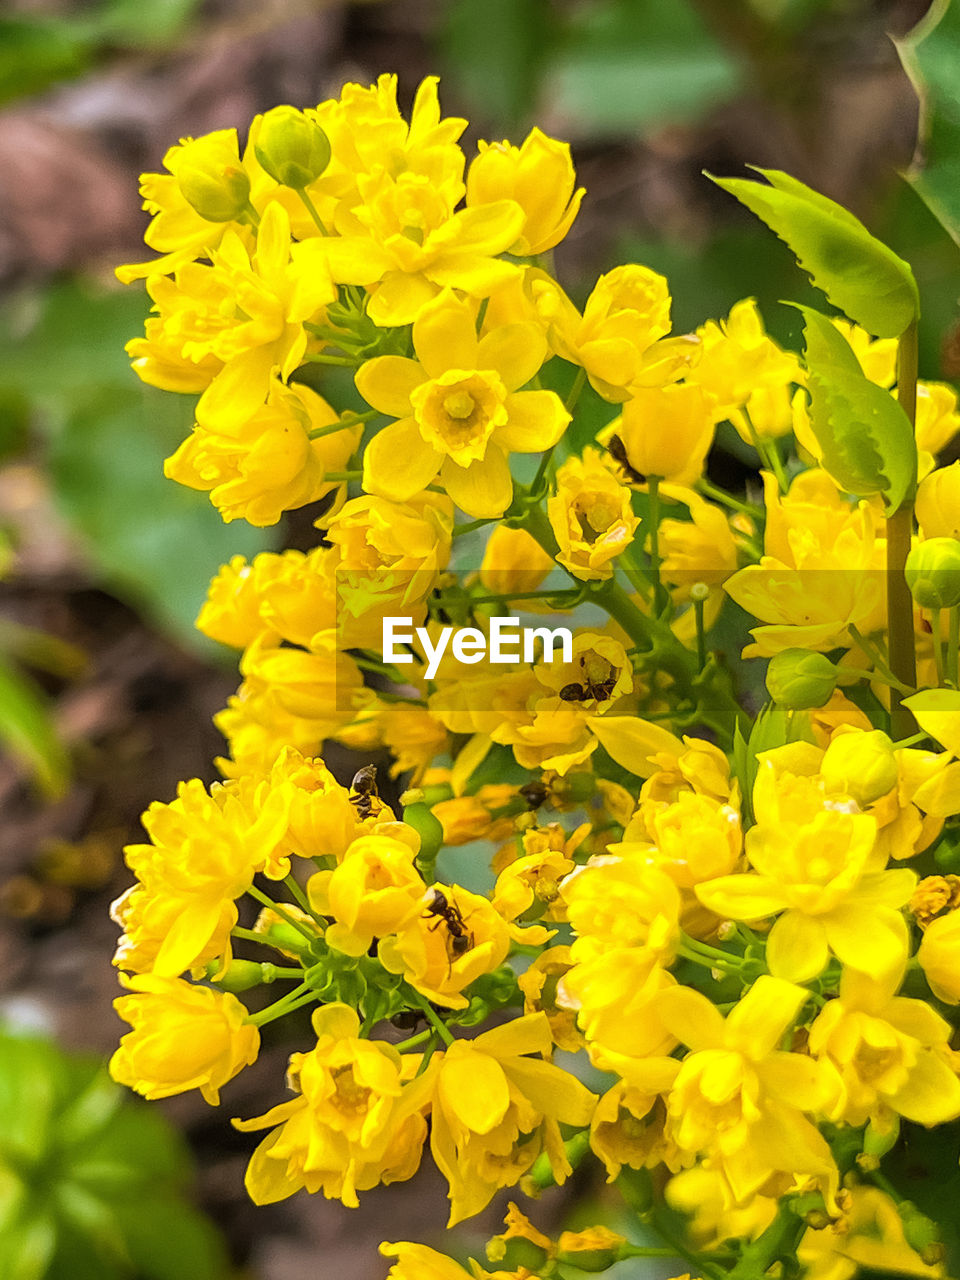 yellow, flower, plant, flowering plant, freshness, beauty in nature, nature, close-up, fragility, growth, flower head, petal, rapeseed, focus on foreground, inflorescence, springtime, vibrant color, mustard, shrub, wildflower, outdoors, no people, blossom, produce, day, plant part, subshrub, leaf